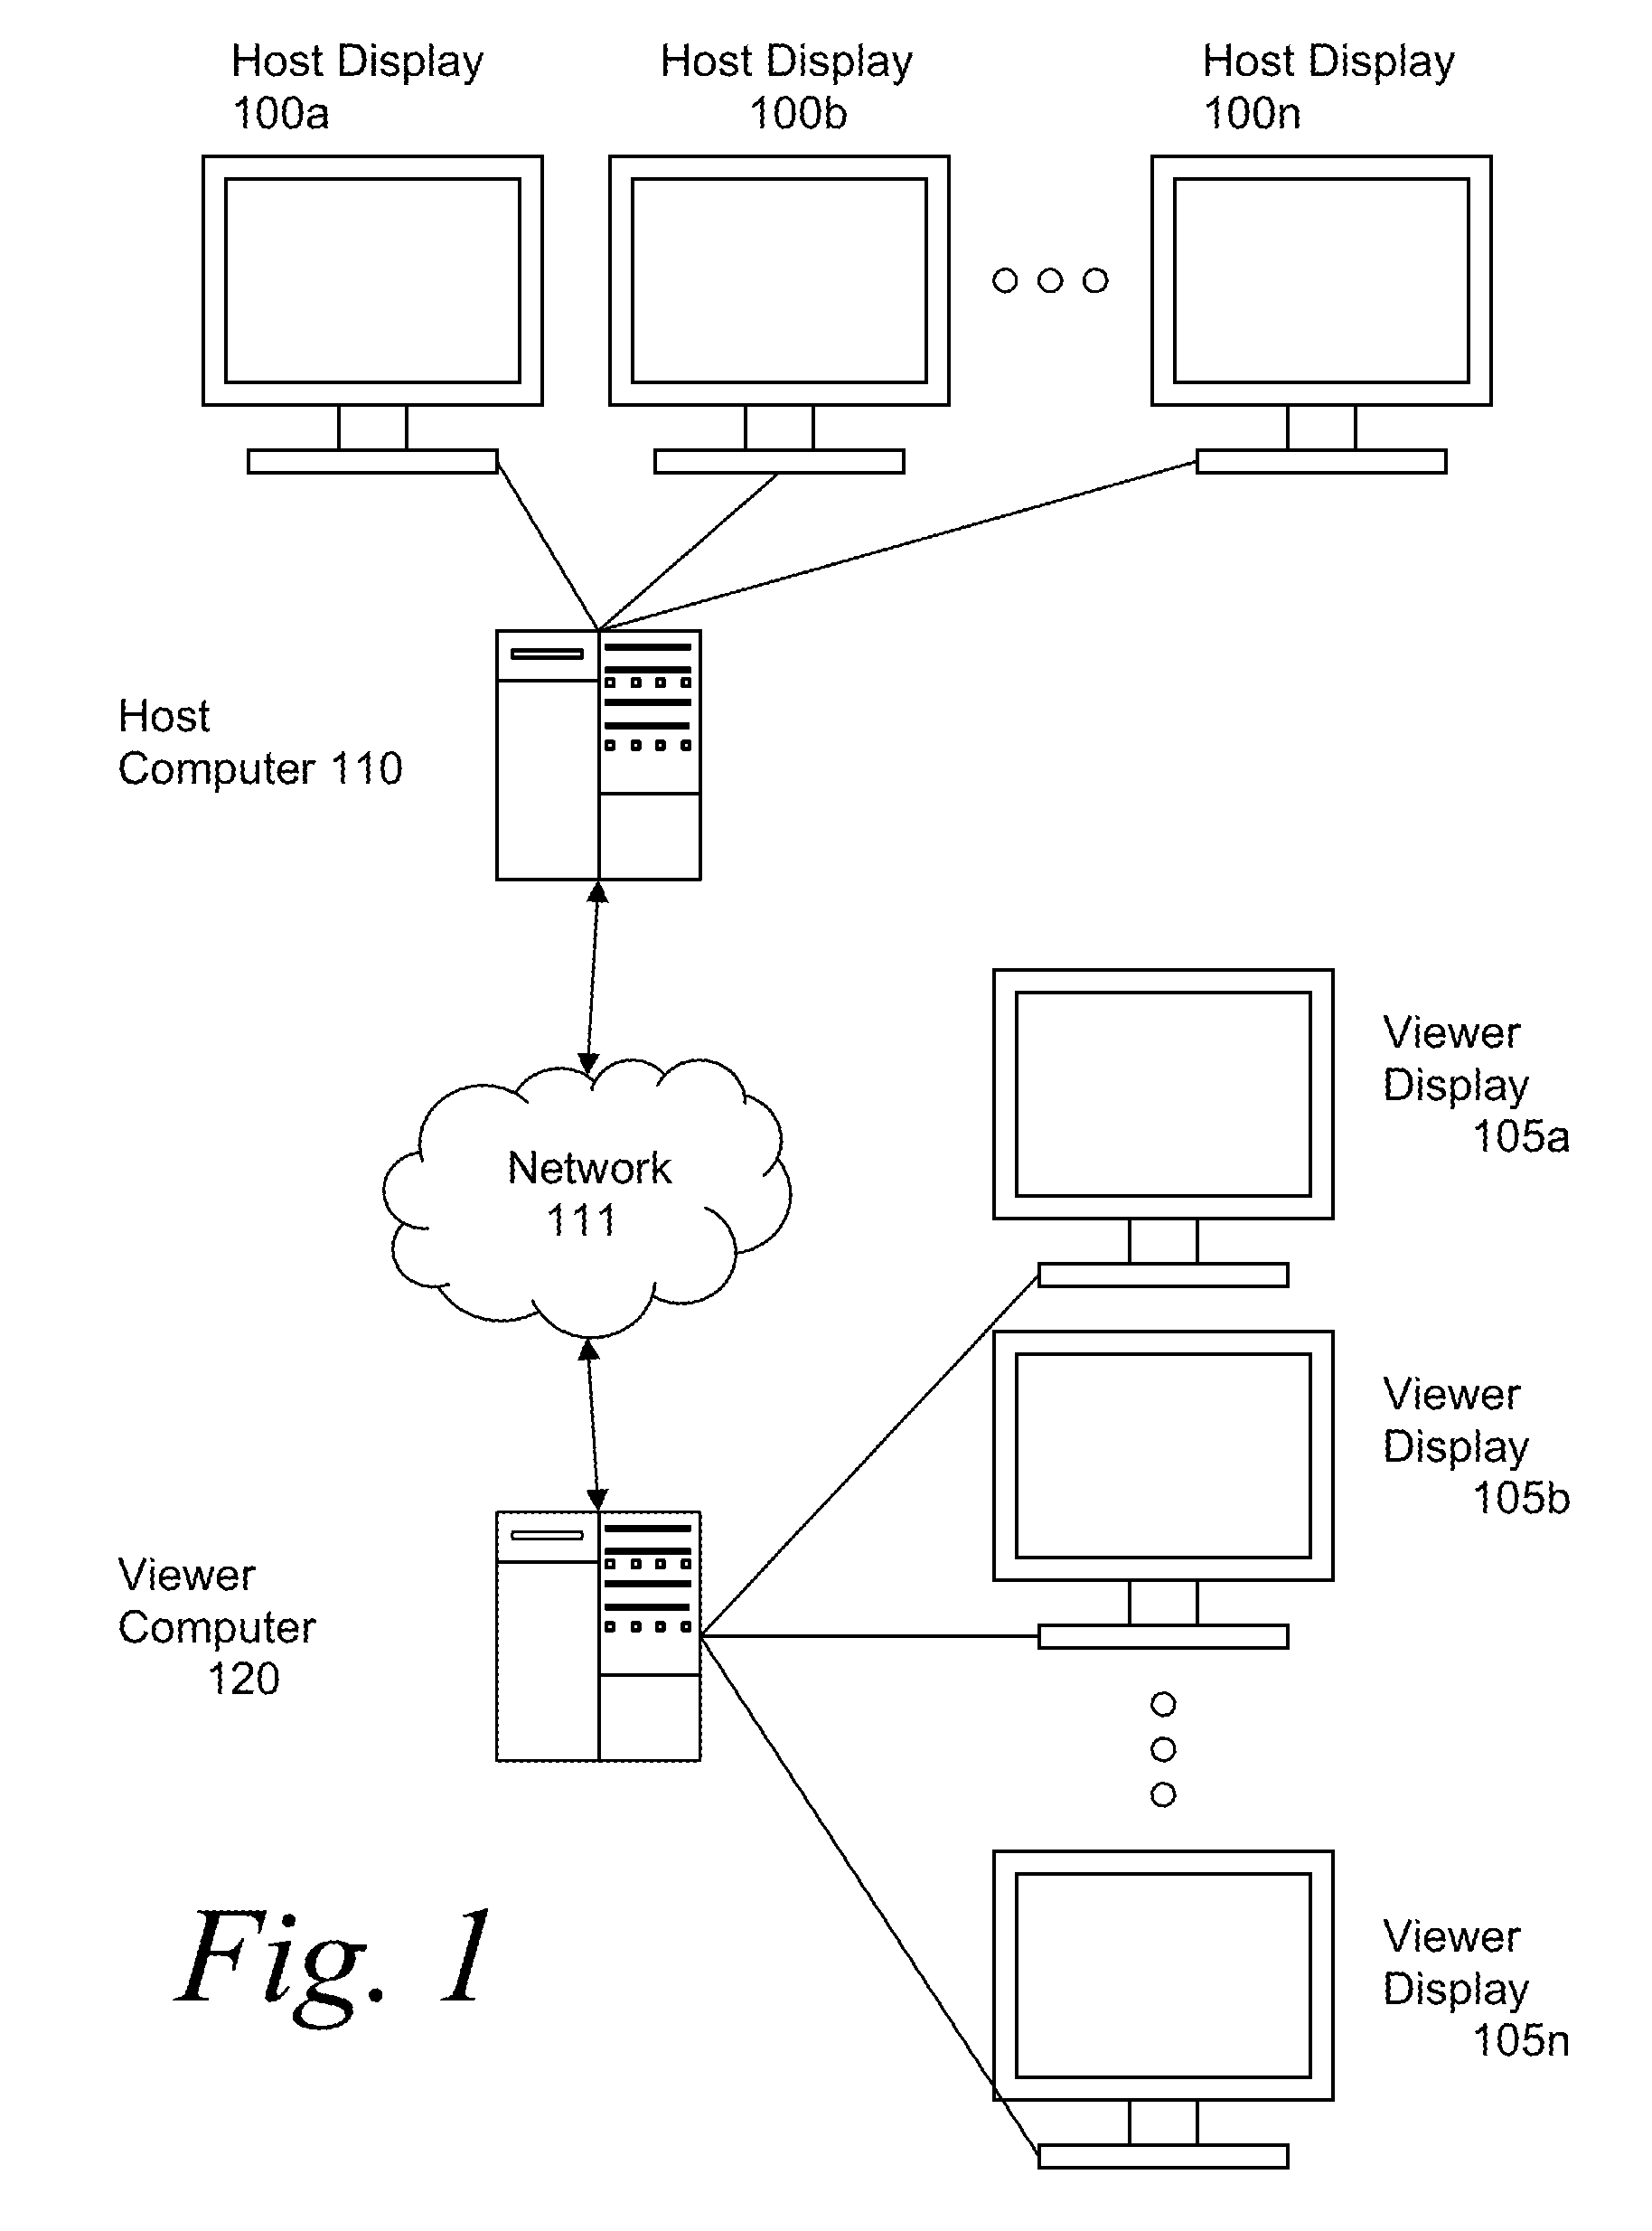 Systems and methods for multiple display support in remote access software